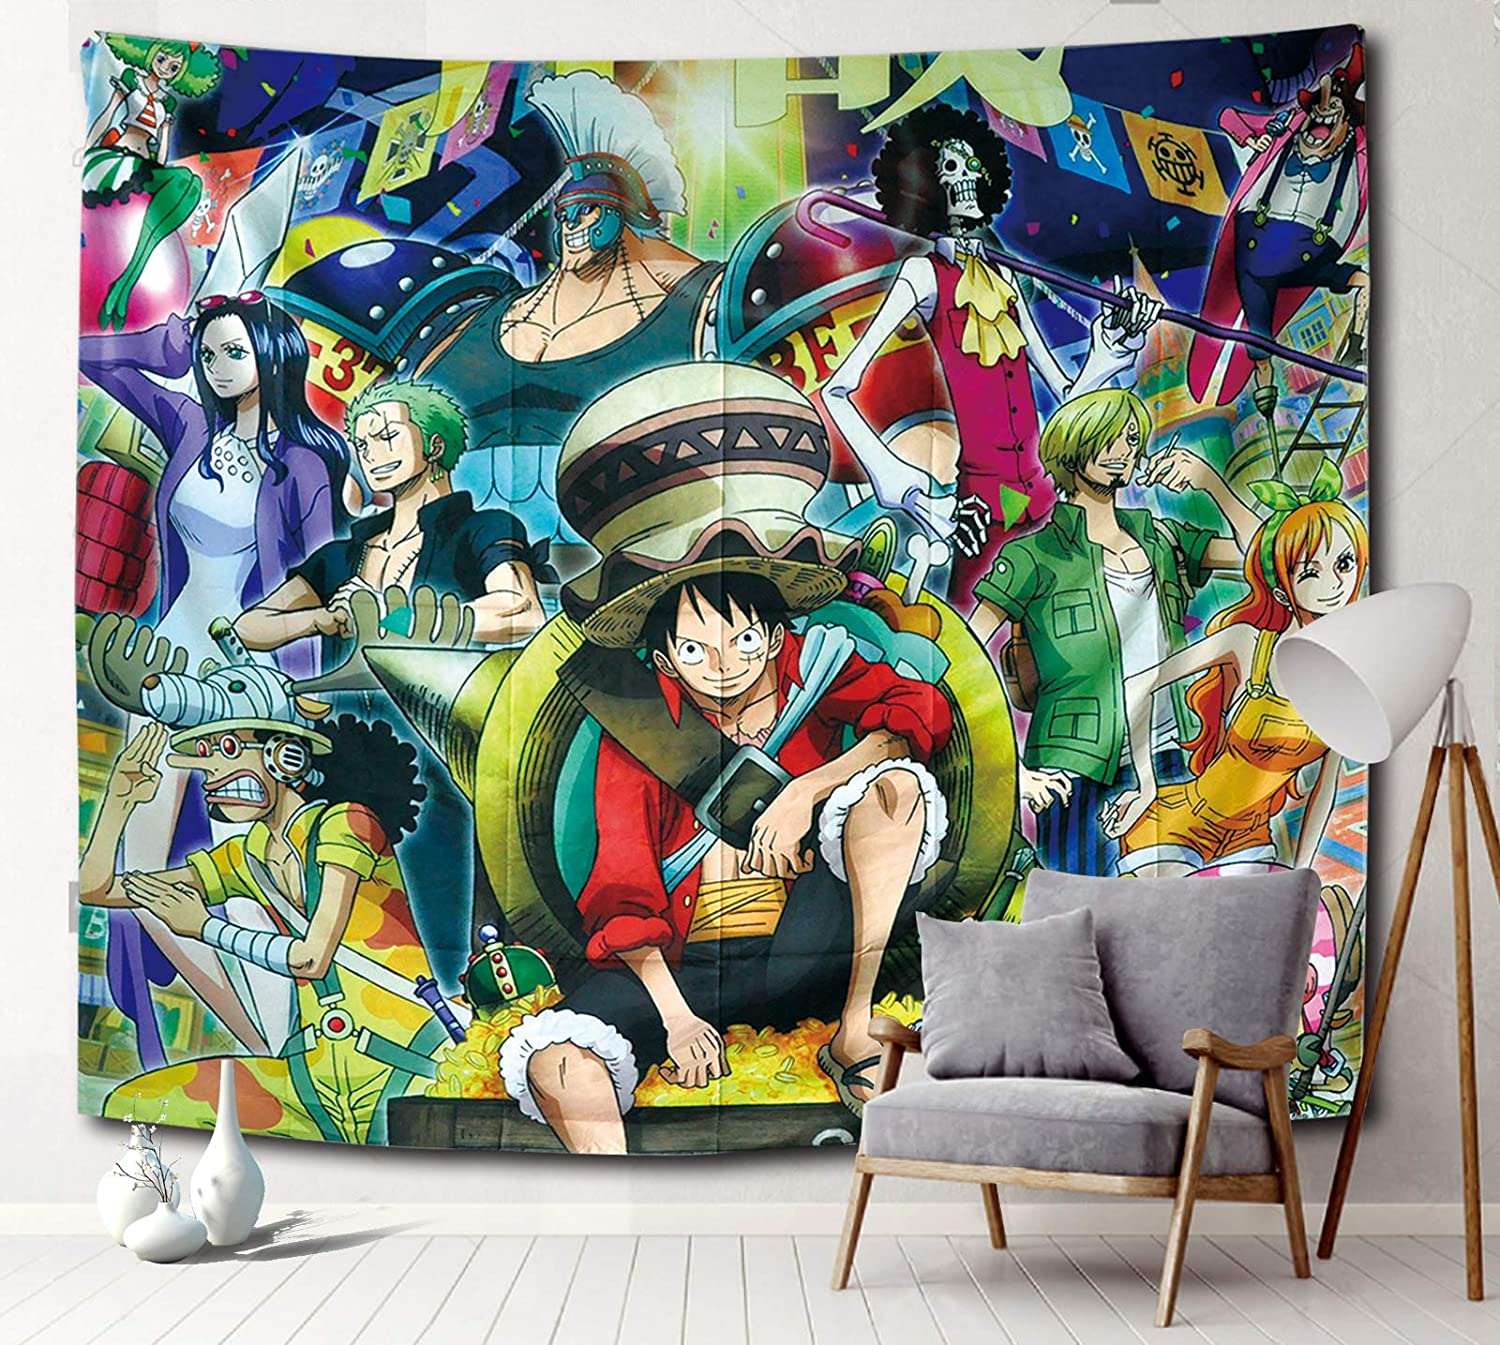 Anime Tapestry Wall Hanging for Bedroom Decor India  Ubuy